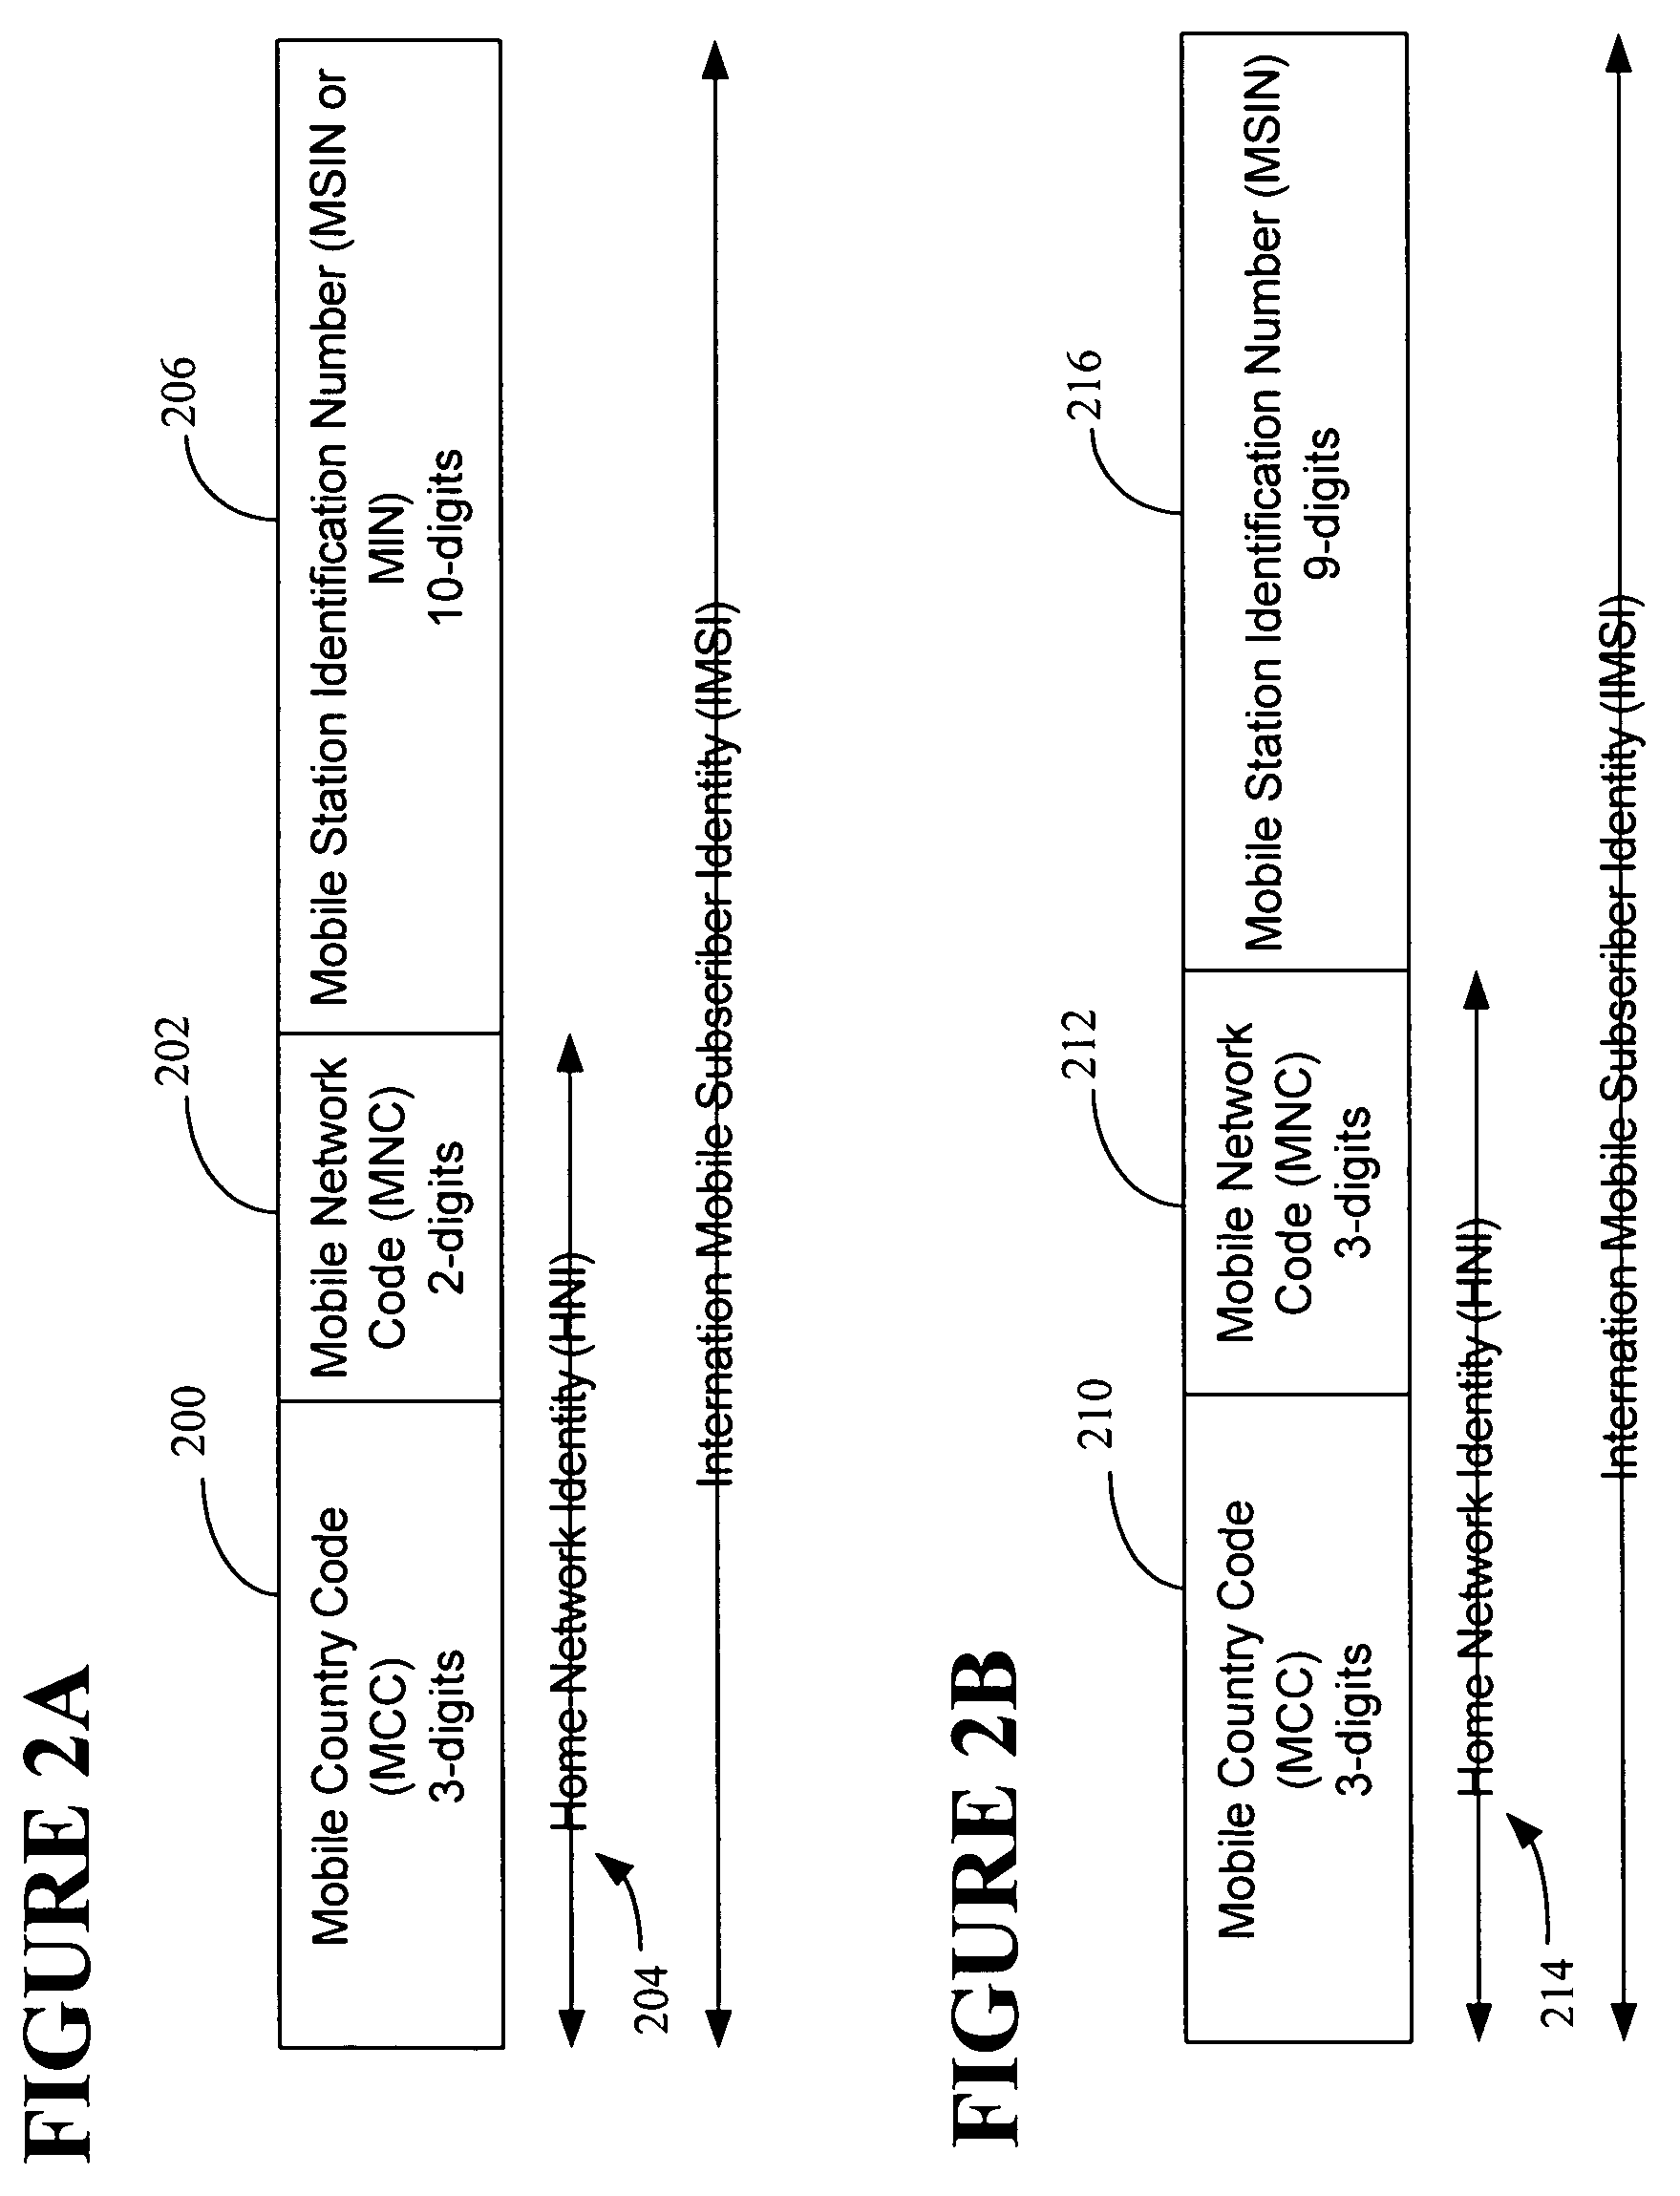 Method for migrating a mobile station identity from a mobile identification number to an international mobile station identity